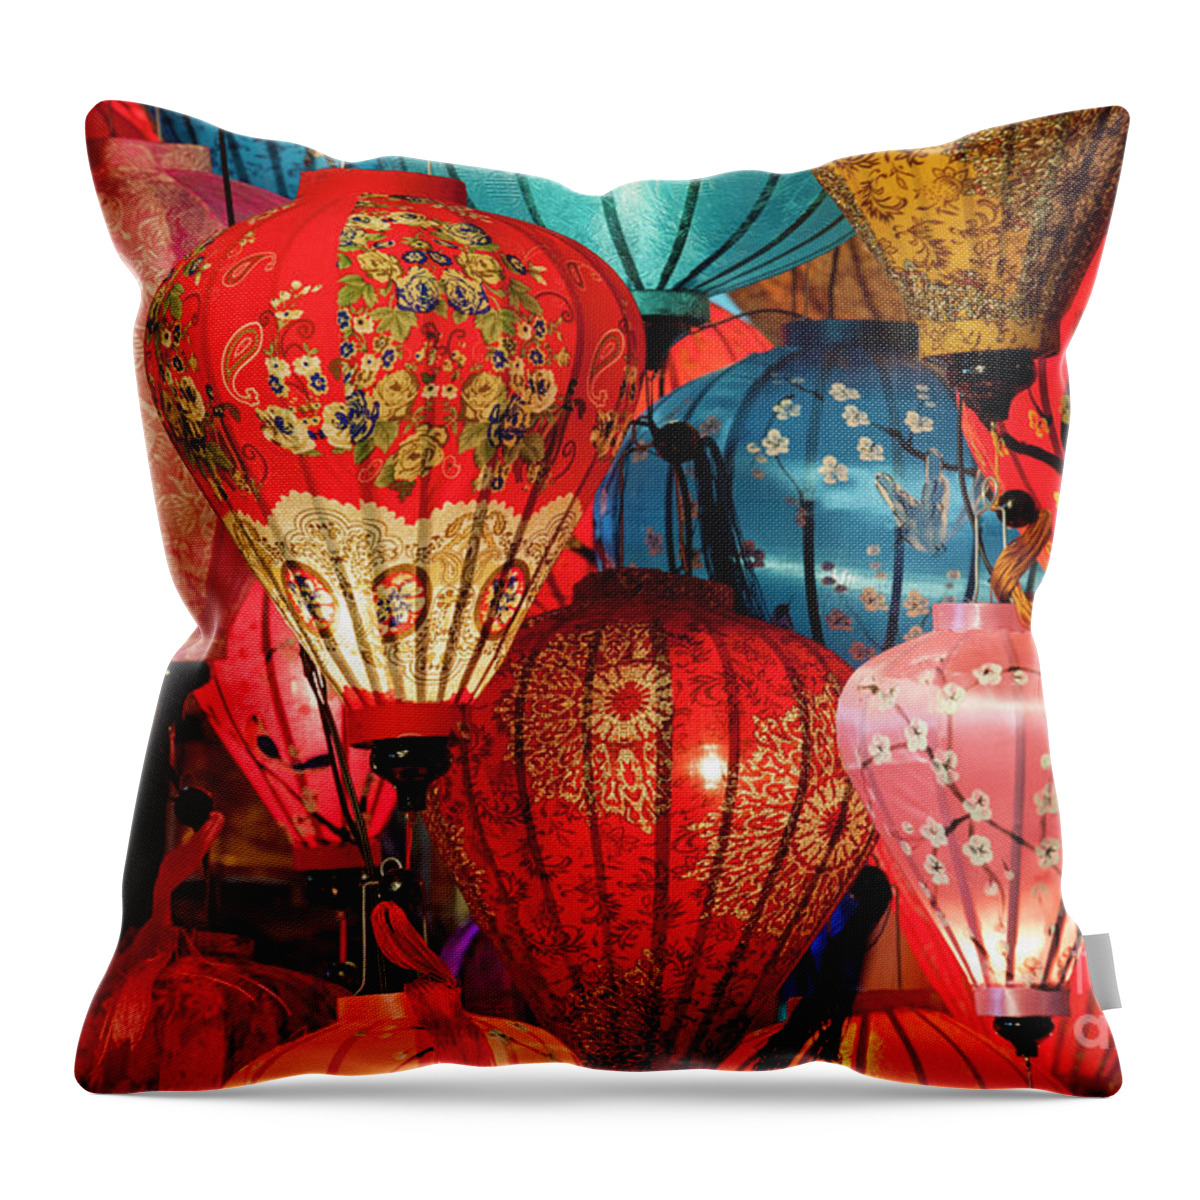 Hoi An Throw Pillow featuring the photograph Lanterns by Timm Chapman